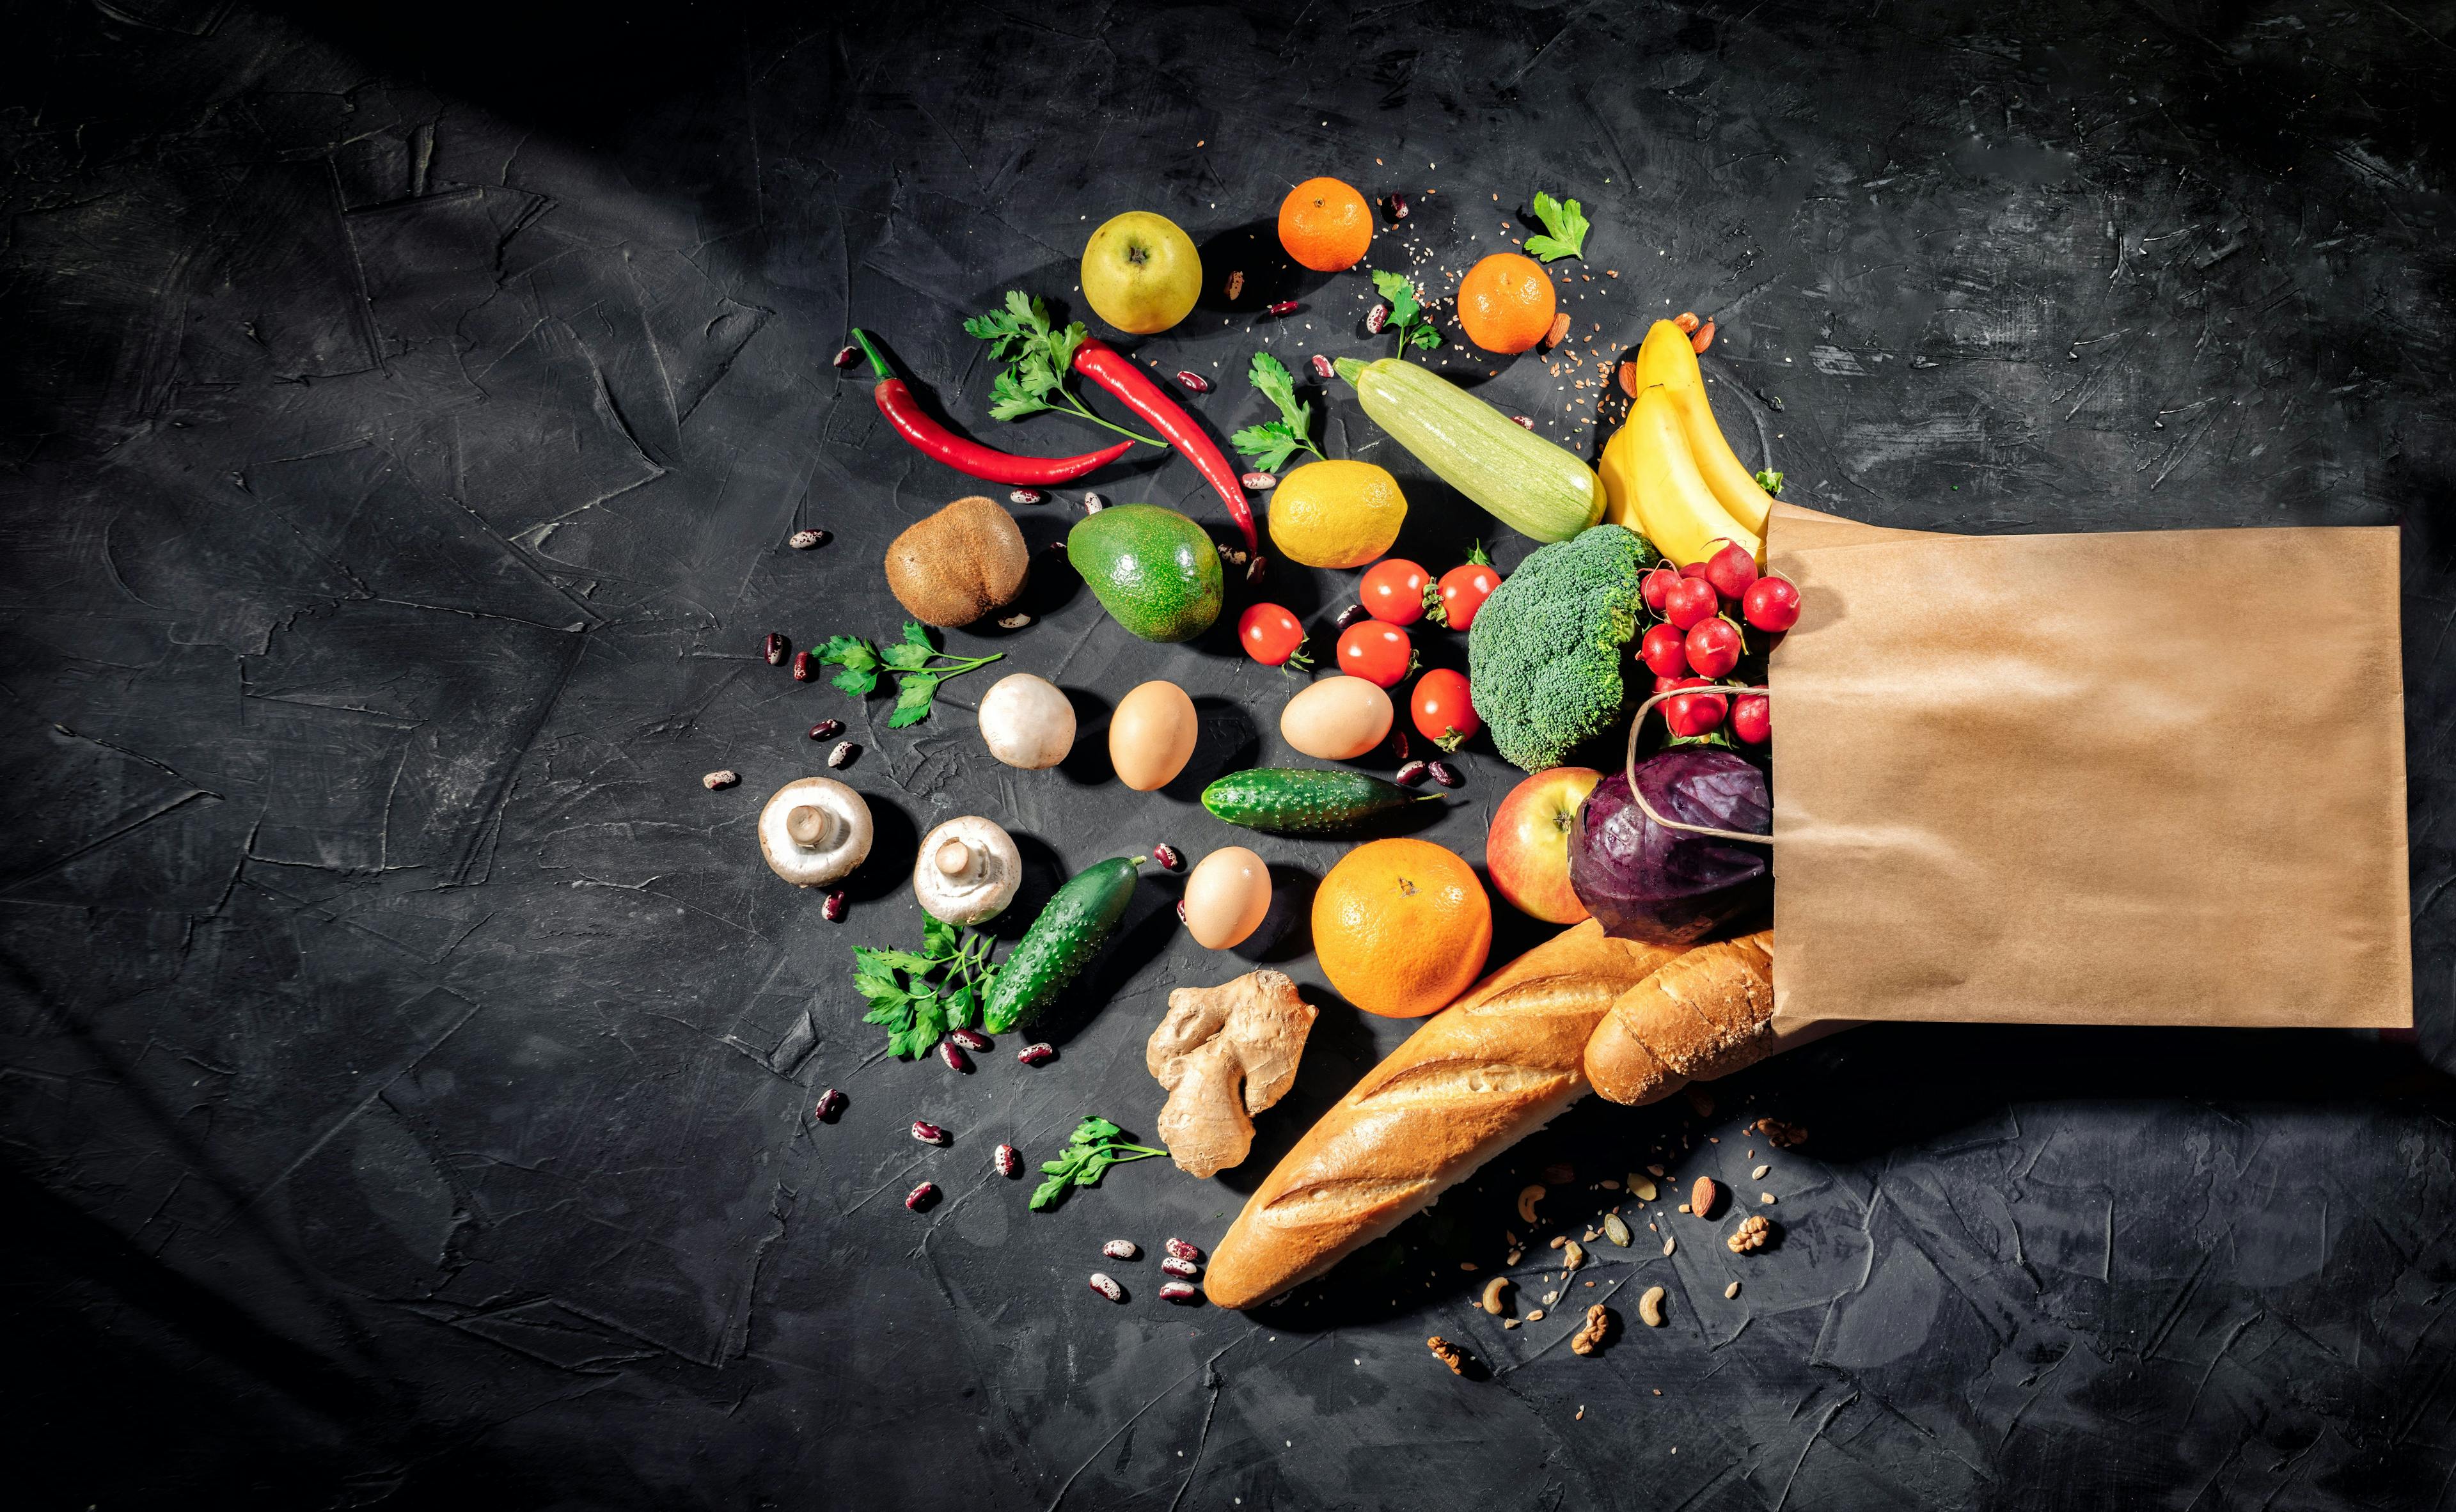 Healthy food in full paper bag of different products vegetables and fruits on dark background | Image Credit: © Andrii - stock.adobe.com